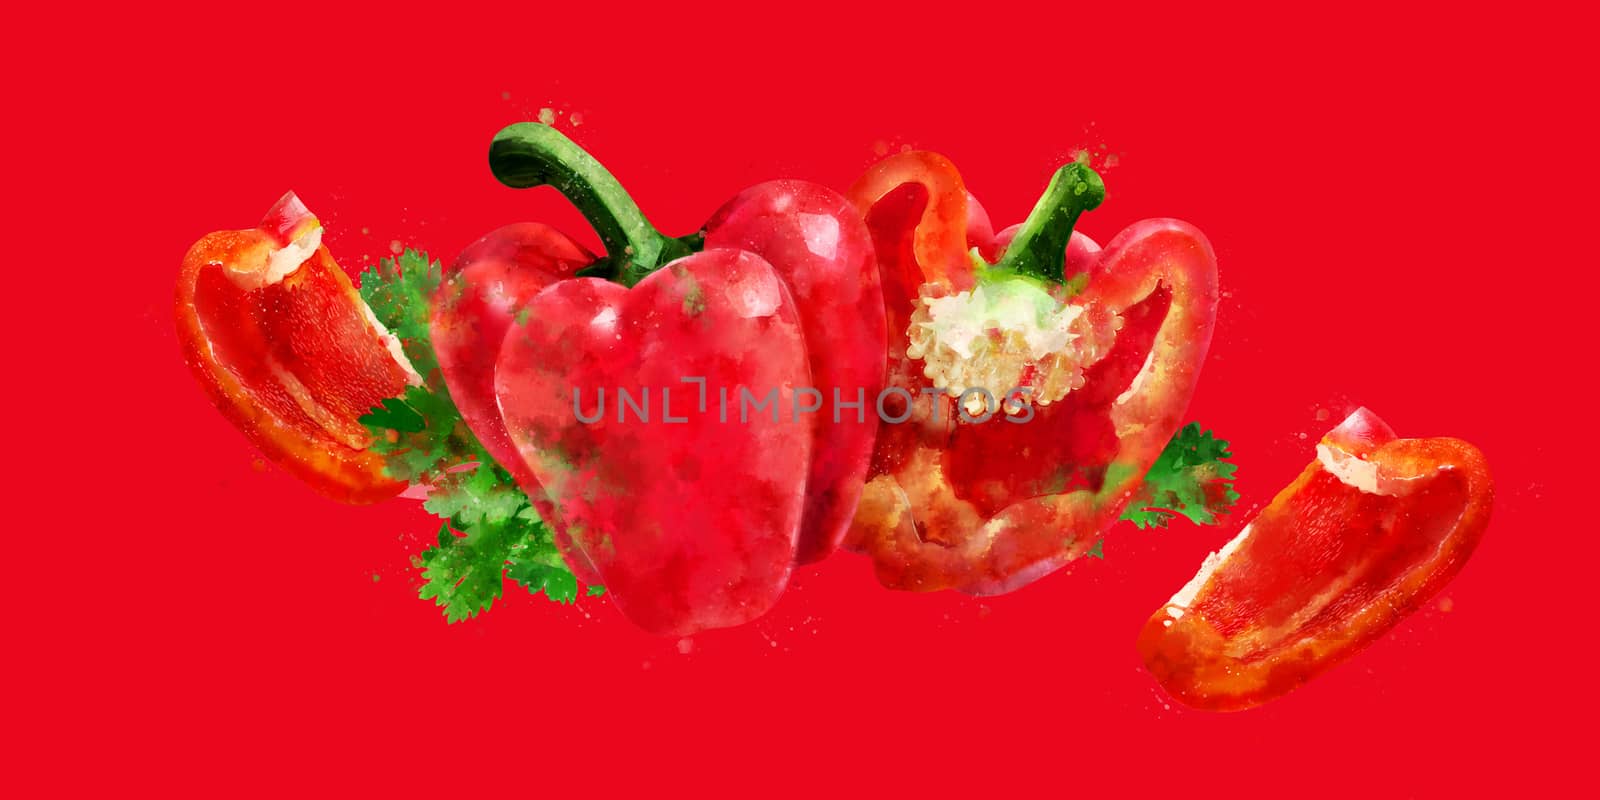 Red Pepper, hand-painted illustration on a red background